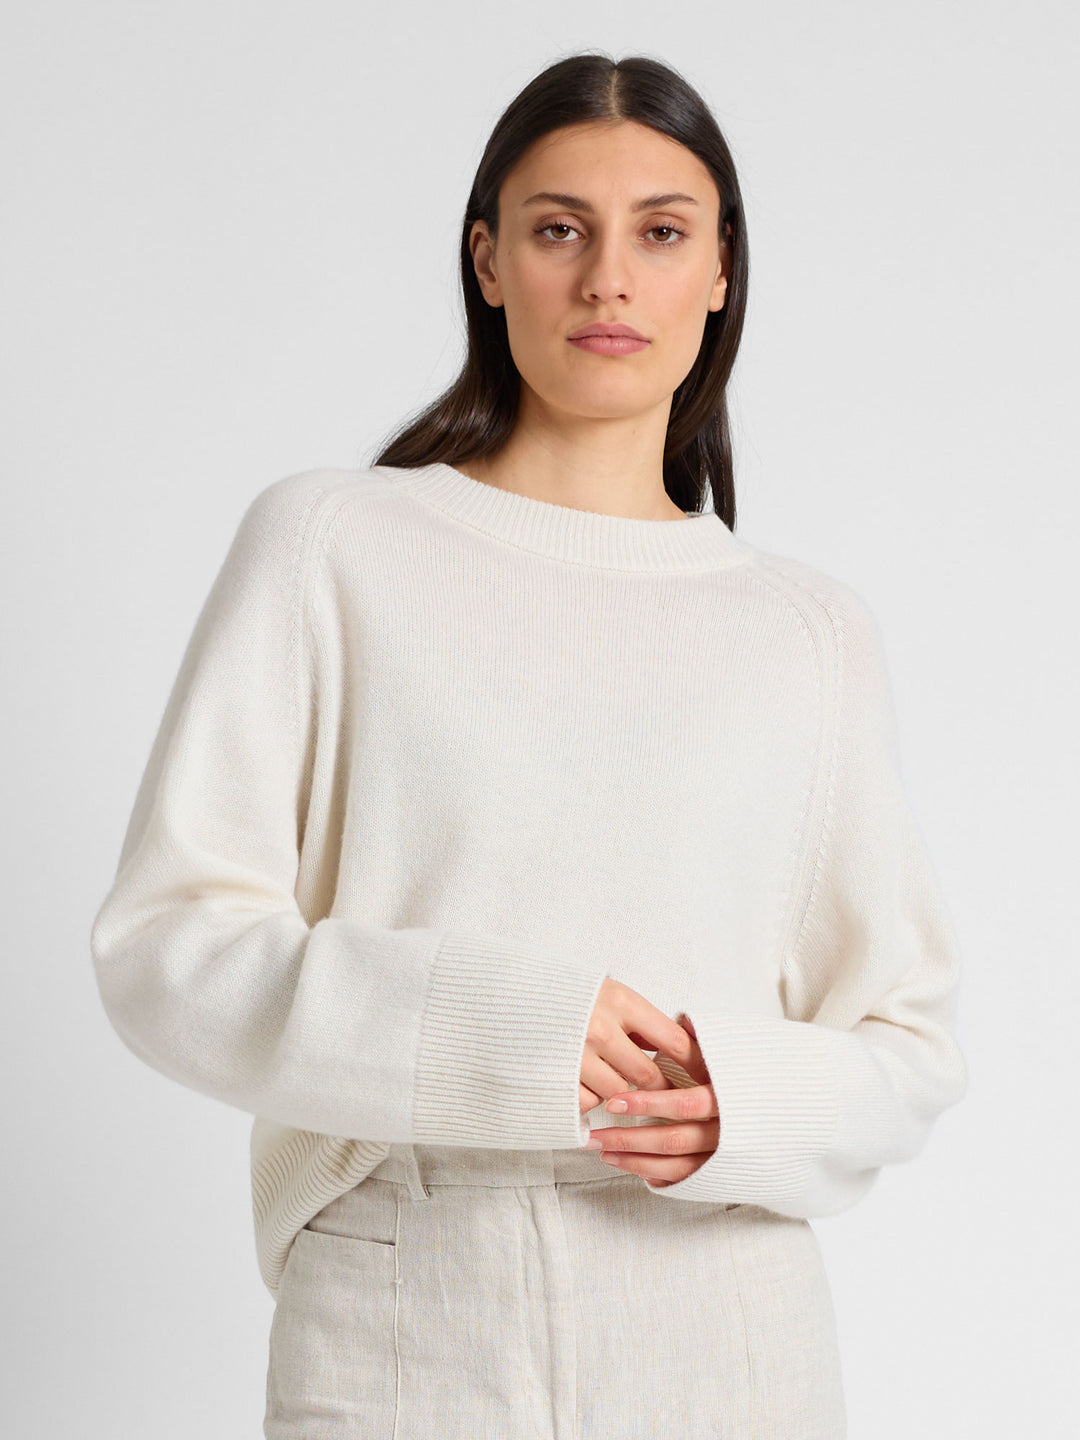 Chunky cashmere sweater "Signy" in 100% pure cashmere. Scandinavian design by Kashmina. Color: White.